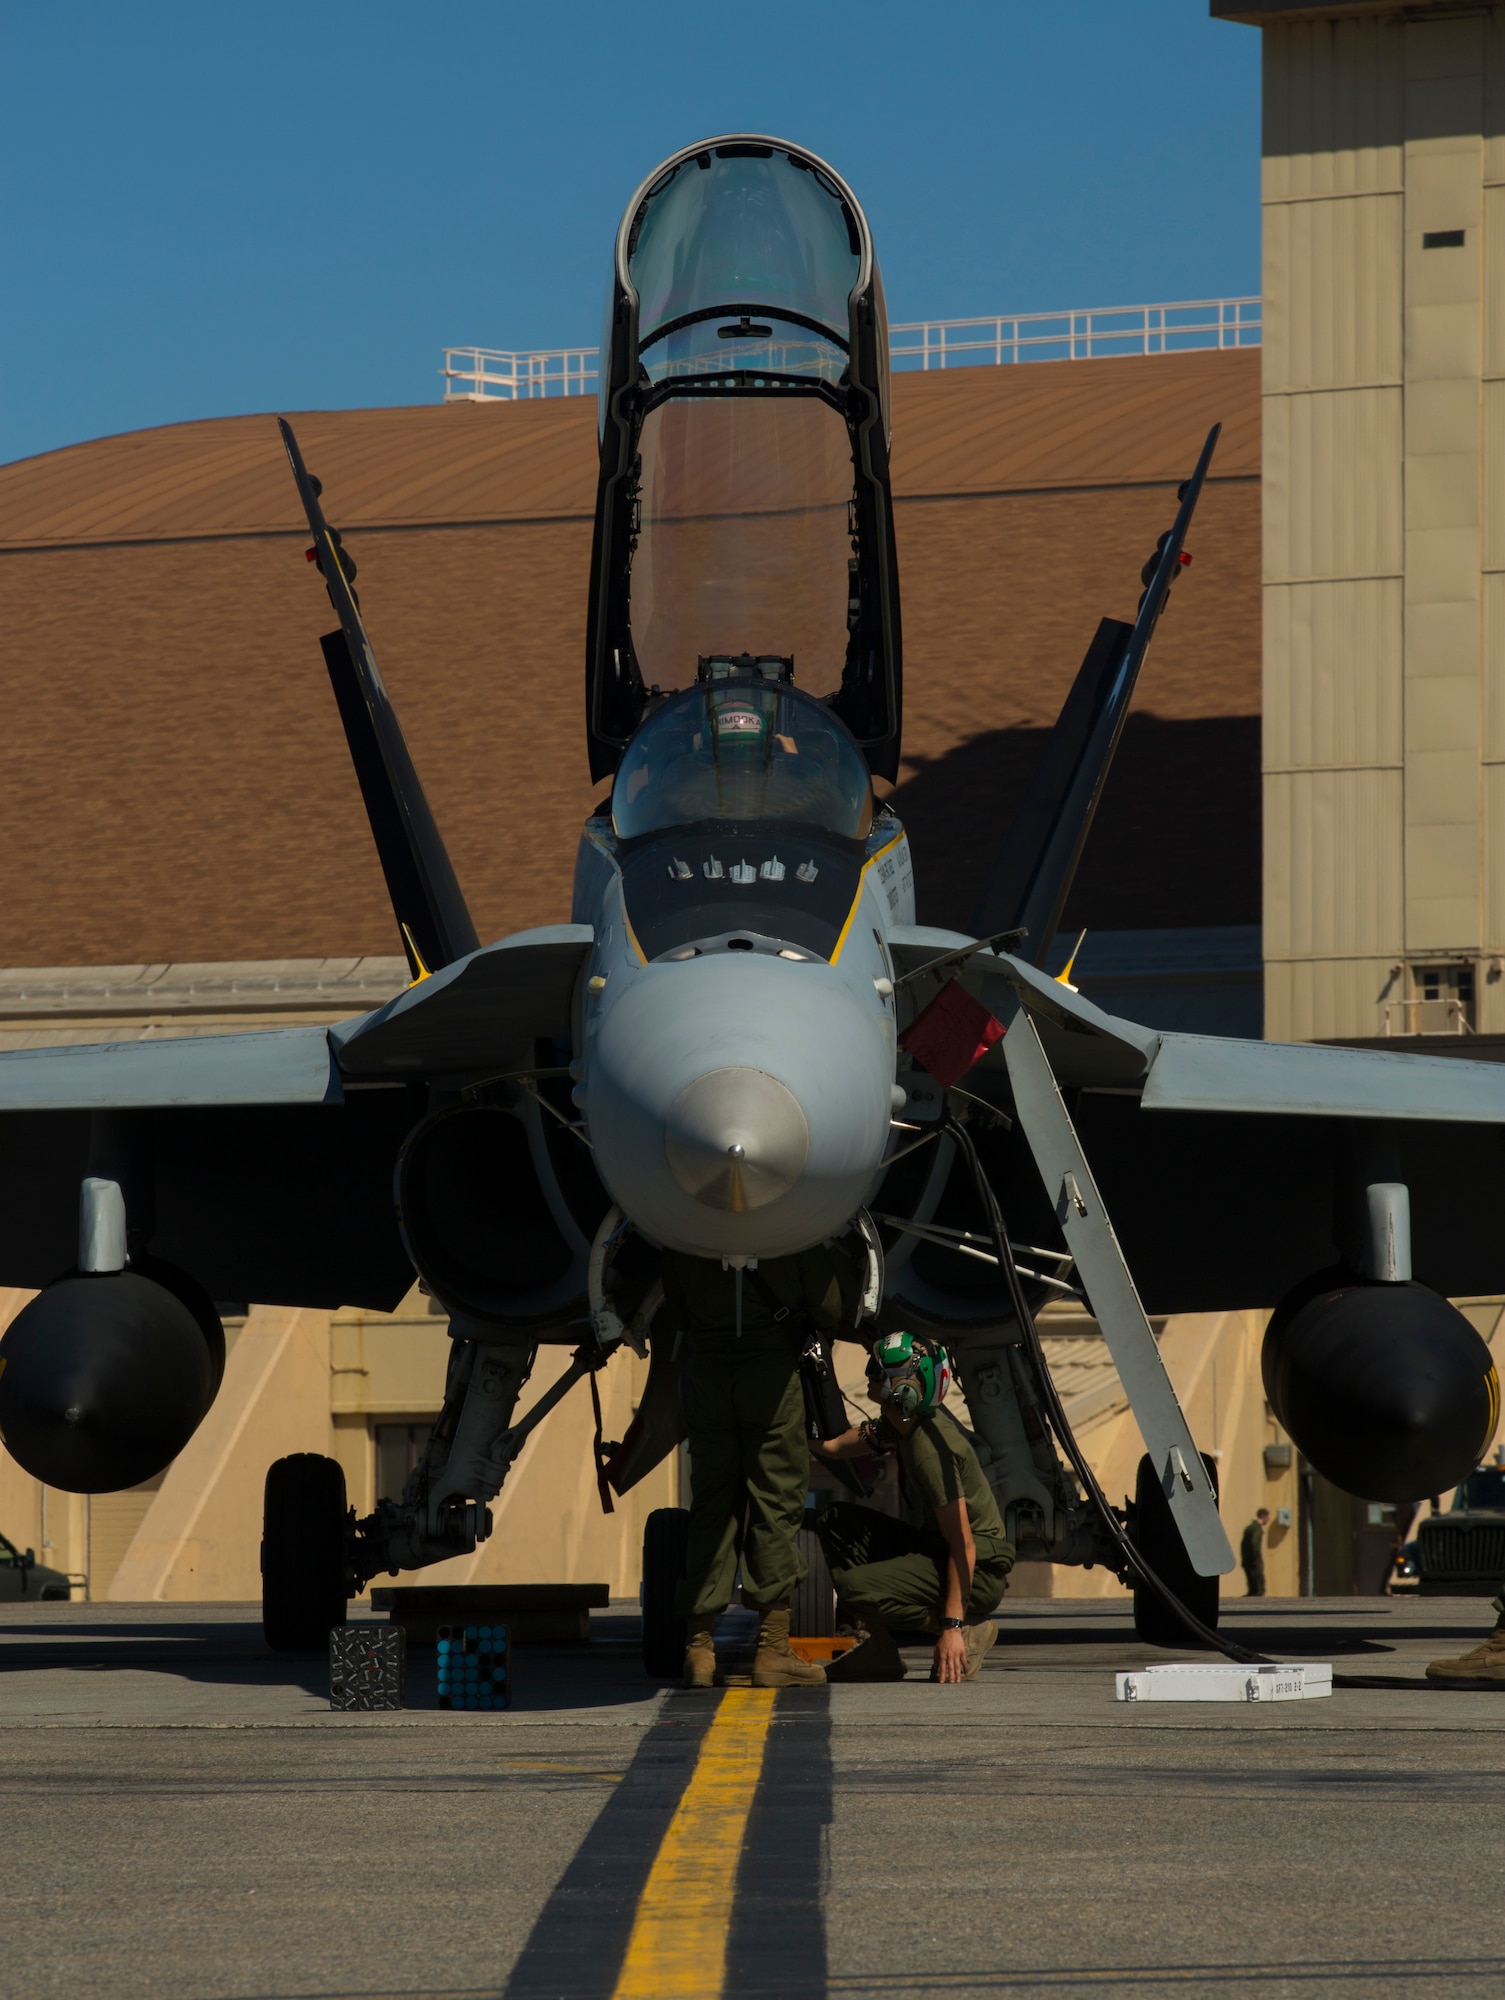 U.S. Marines with Marine All-Weather Fighter Attack Squadron (VMFA [AW]) 242, 1st Marine Aircraft Wing conduct routine maintenance on a Marine Corps FA-18D Hornet assigned to VMFA (AW)-242 during Exercise Northern Edge 15 at Eielson Air Force Base, Alaska, June 15, 2015. Northern Edge is Alaska’s premier joint training exercise designed to practice operations, techniques and procedures as well as enhance interoperability among the services. Thousands of participants from all services, Airmen, Soldiers, Sailors, Marines and Coast Guardsmen from active duty, Reserve and National Guard units are involved. (U.S. Marine Corps photo by Cpl. Suzanne Dickson/Released)